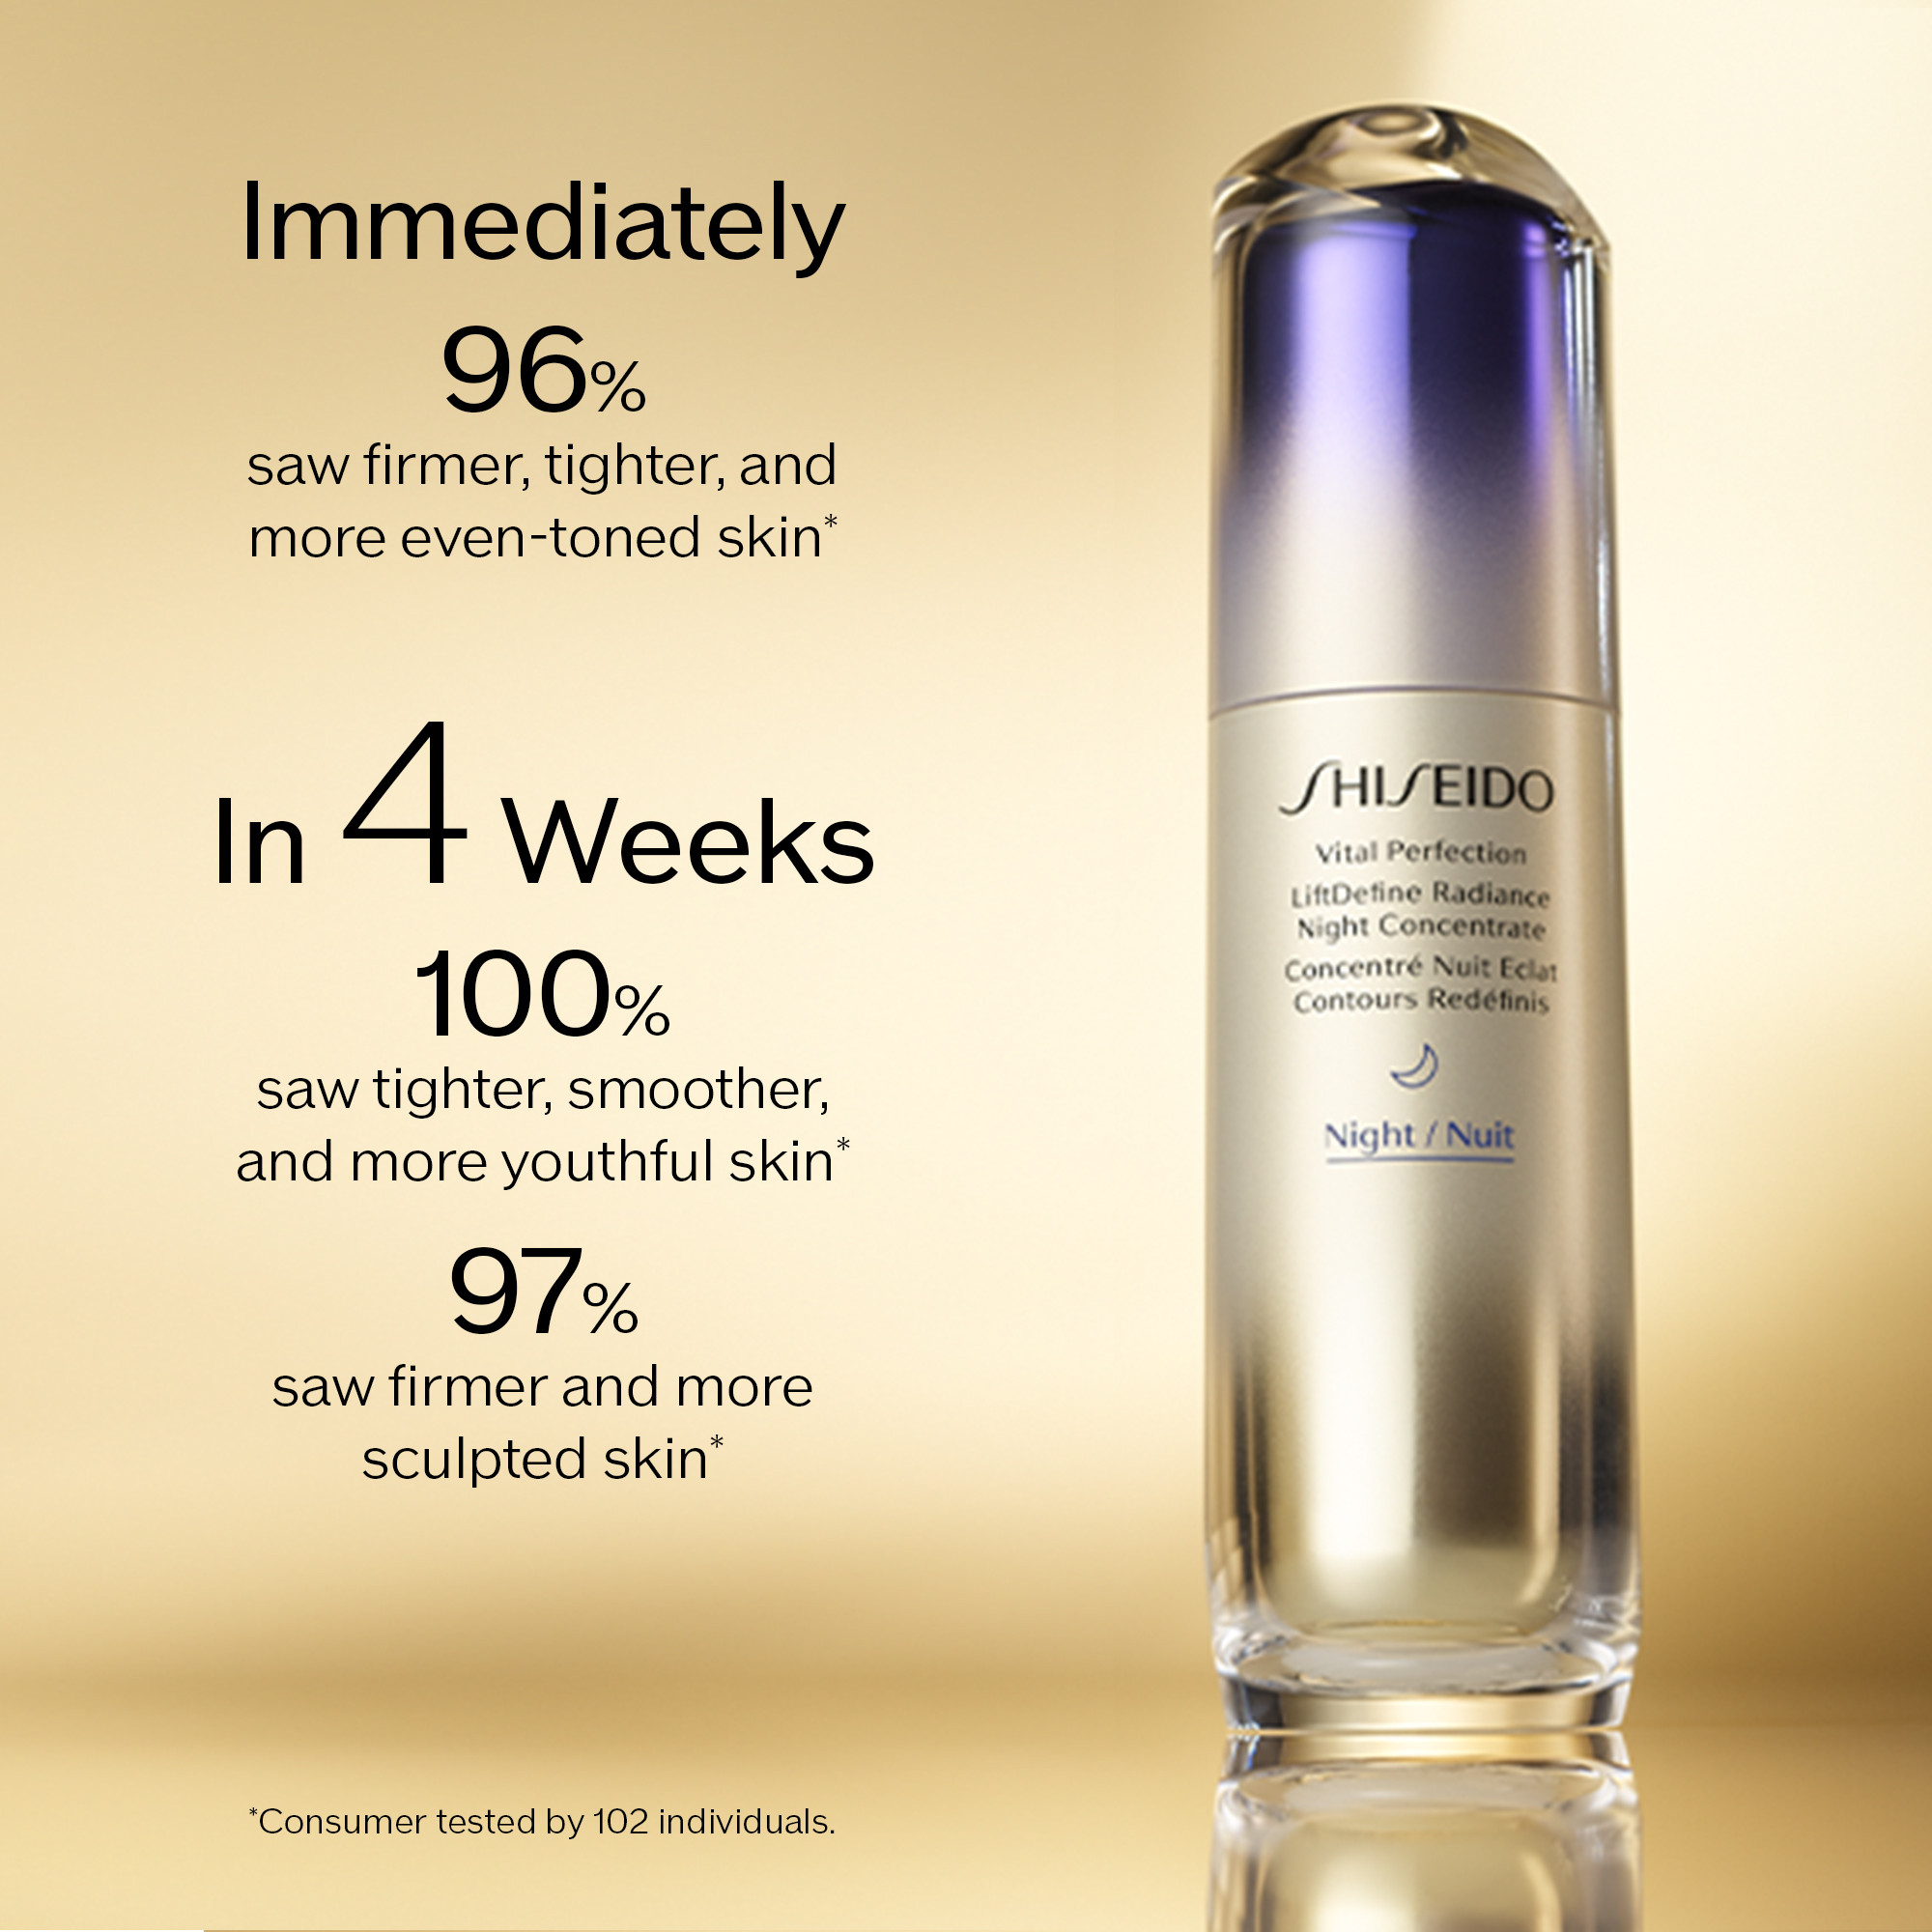 Shiseido Night Concentrate Benefits